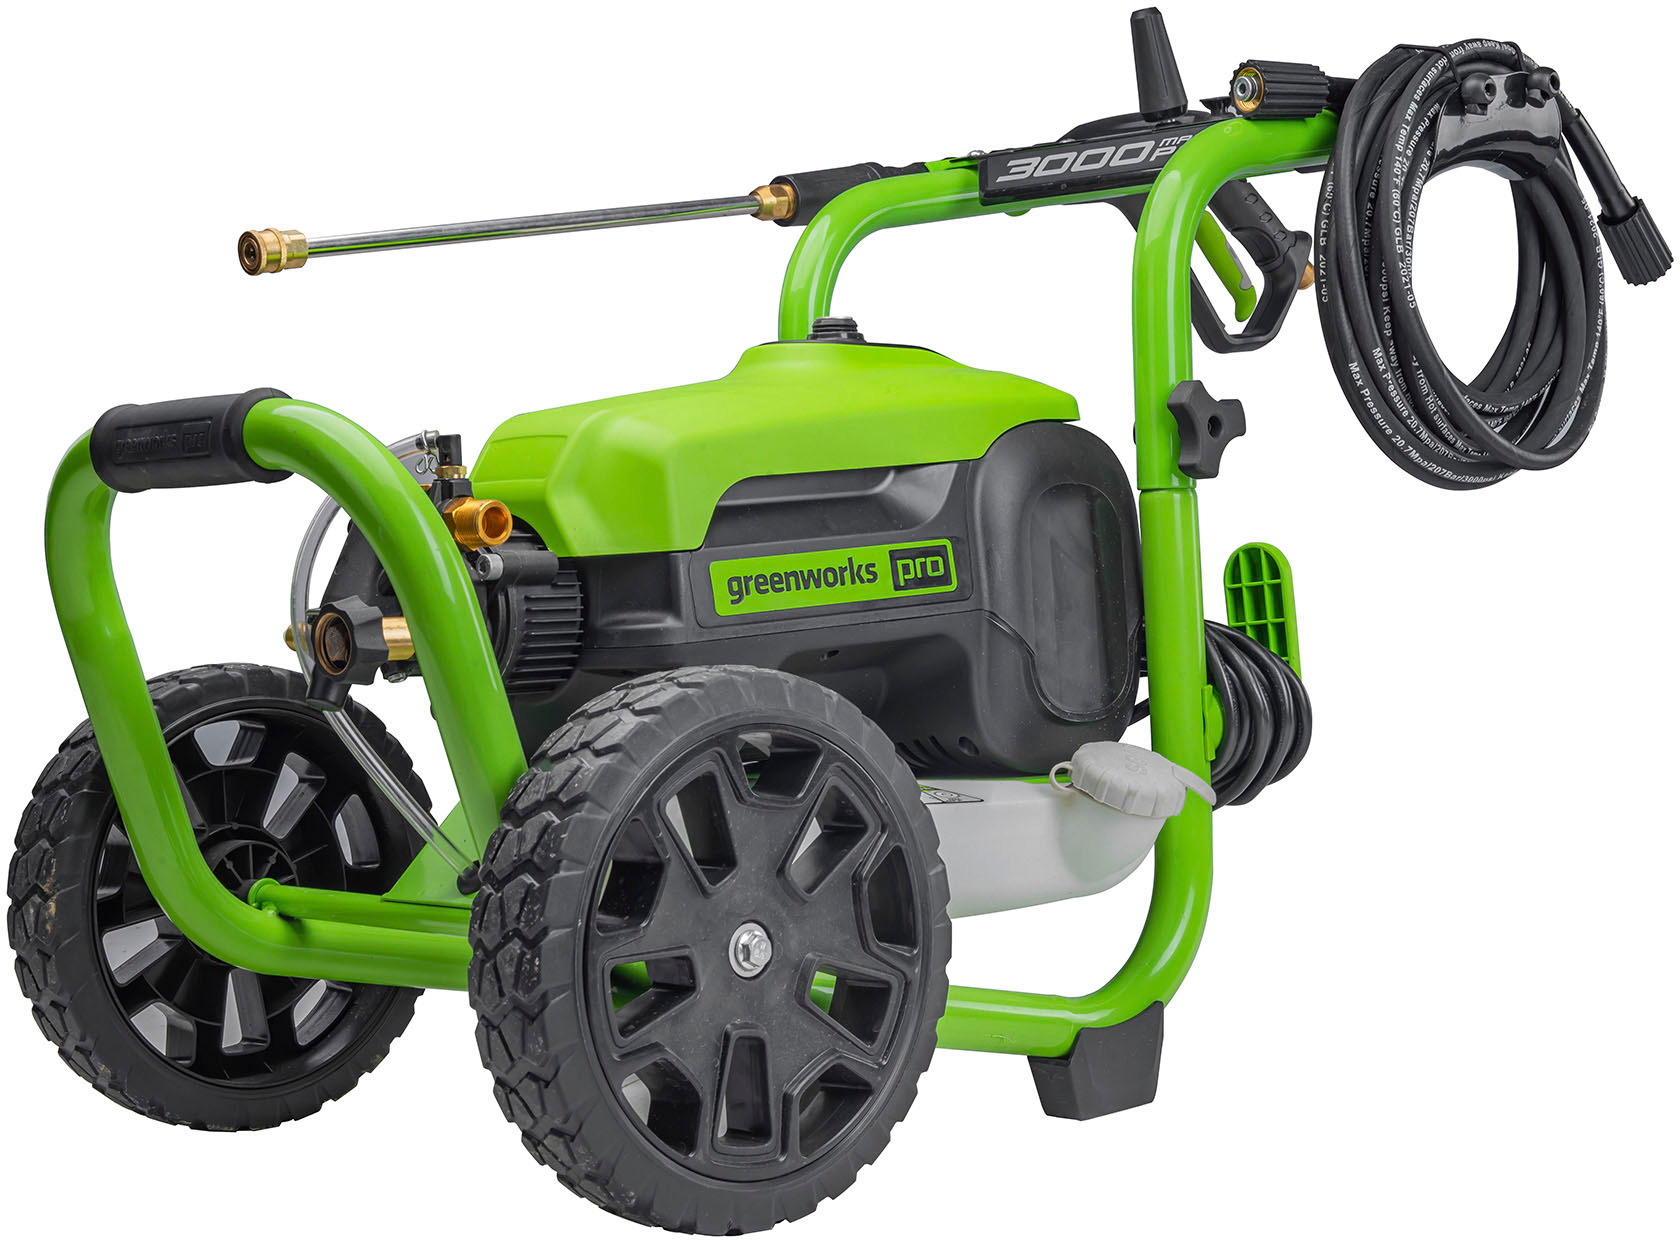 Greenworks Pro Electric Pressure Washer up to 3000 PSI at 2.0